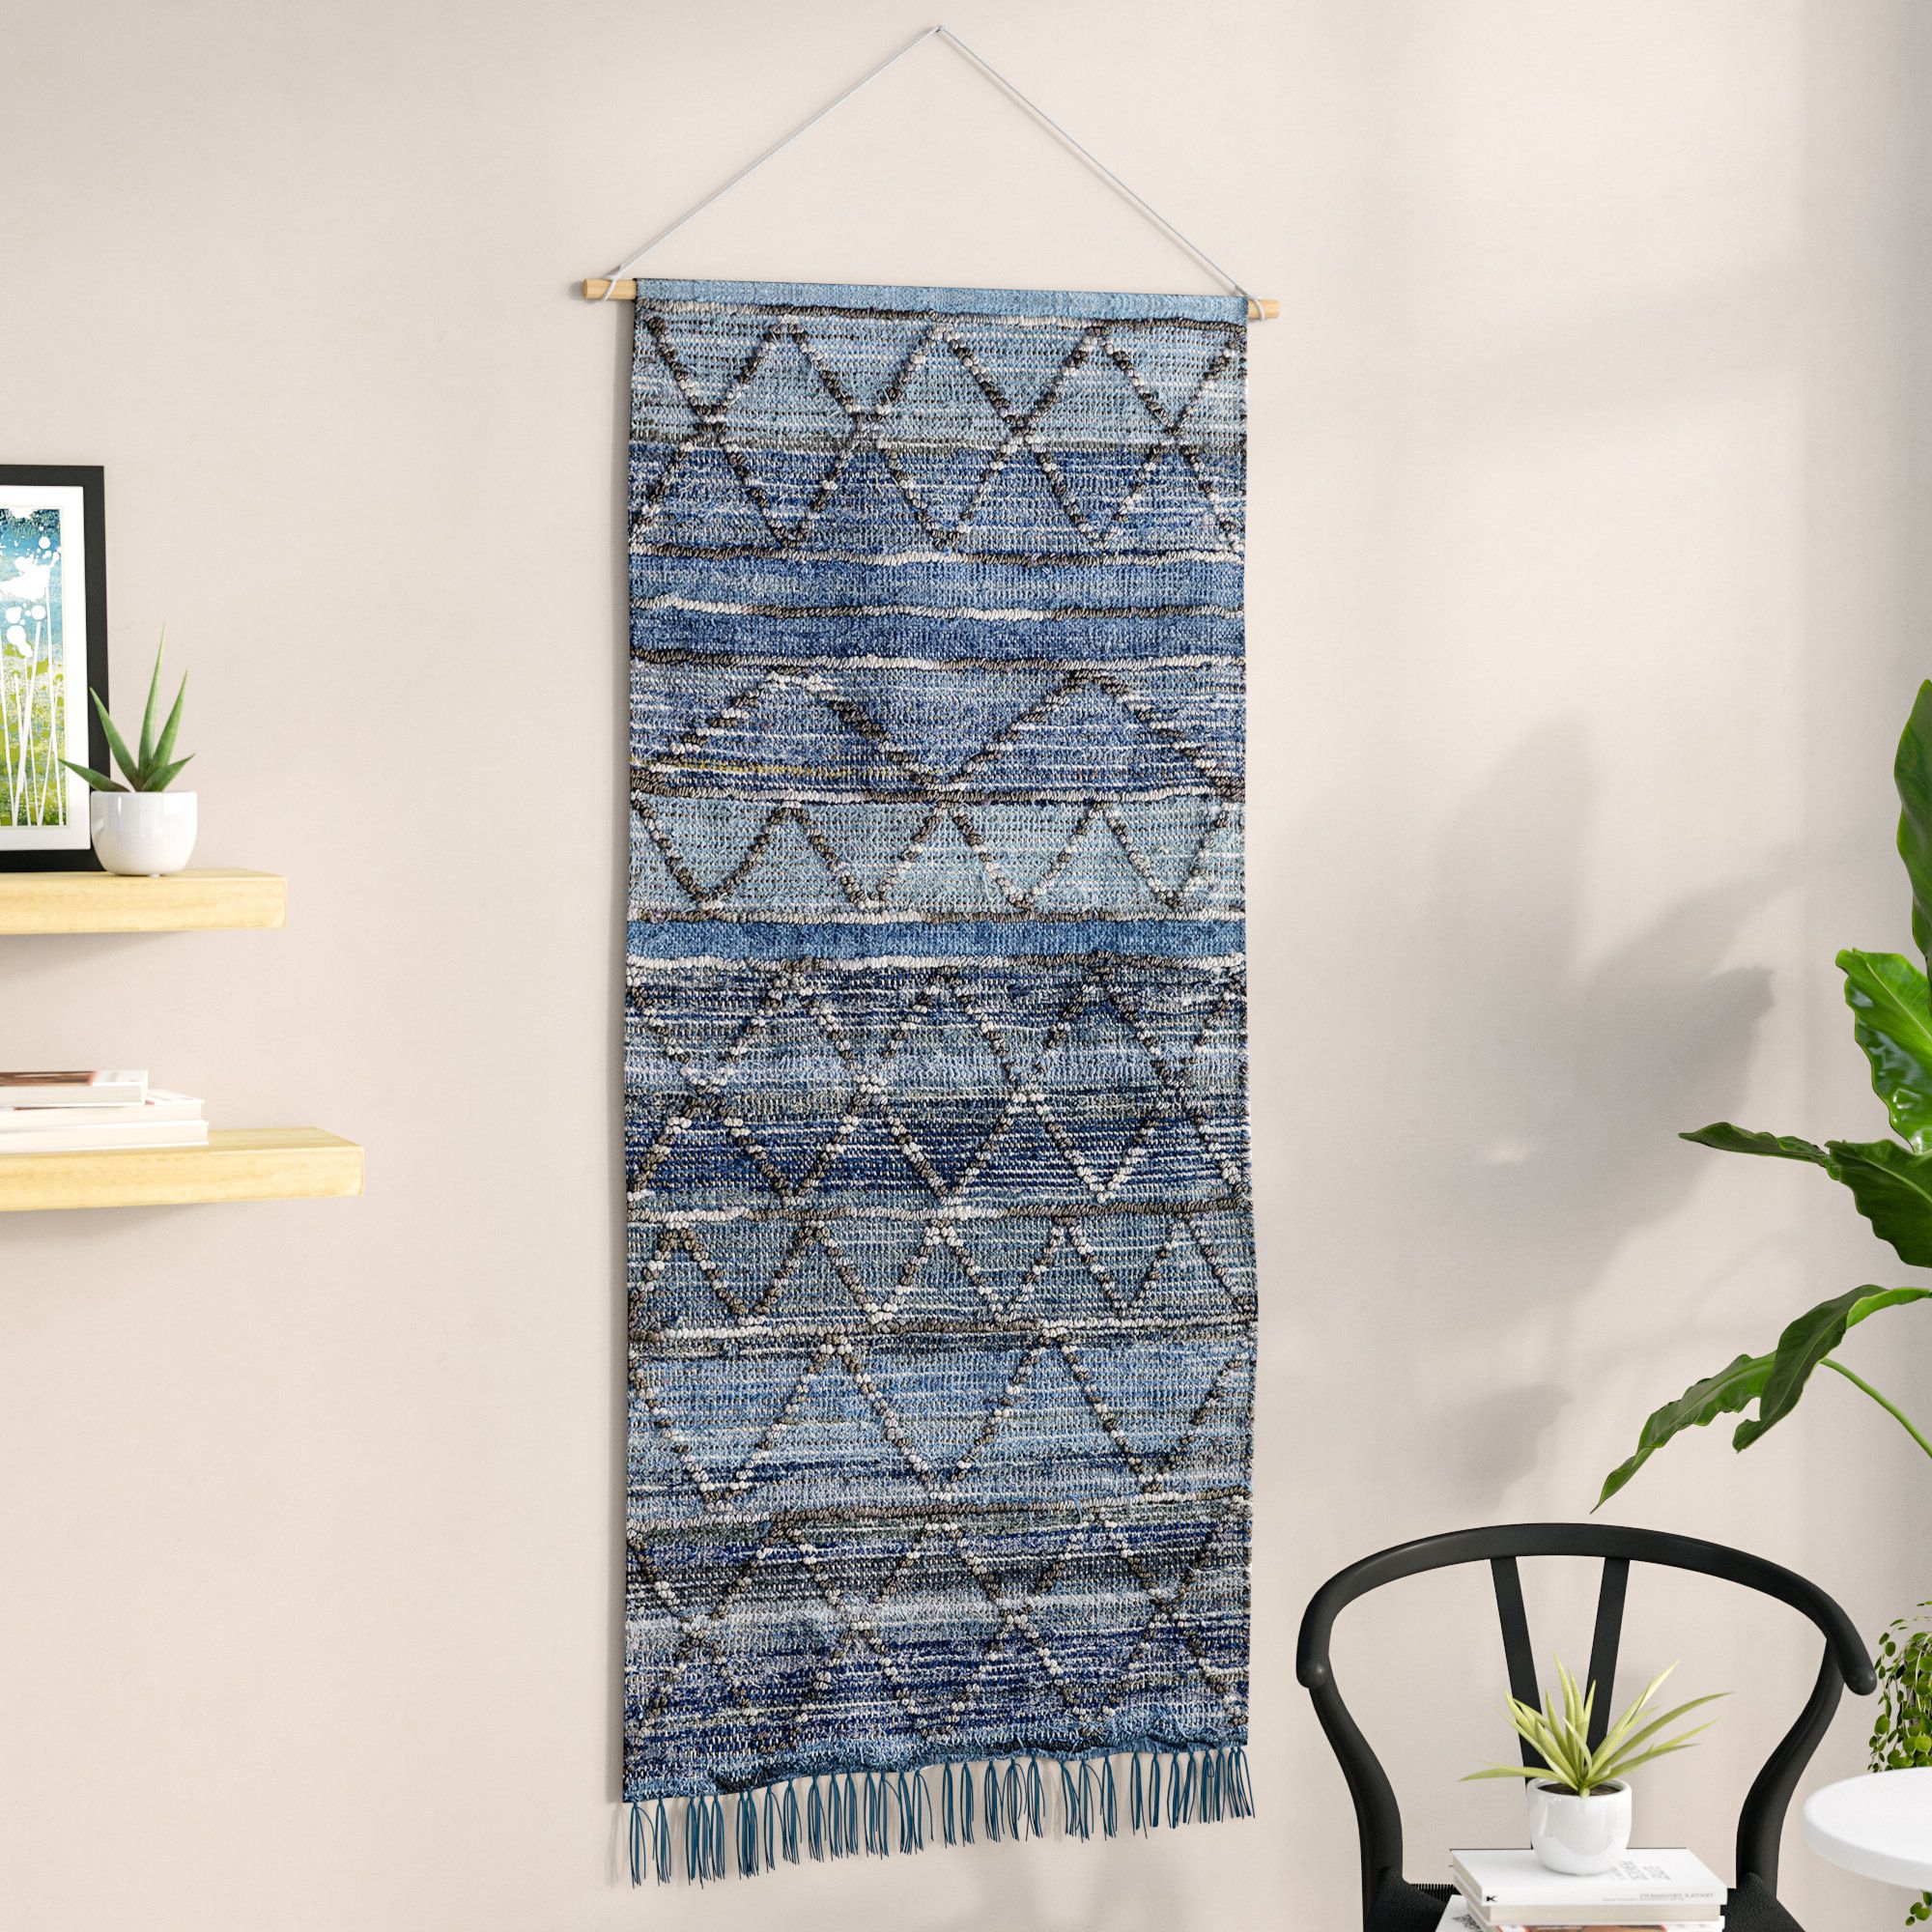 Blended Fabric Wall Hanging With Hanging Accessories Included For 2020 Blended Fabric Fringed Design Woven With Rod (View 4 of 20)